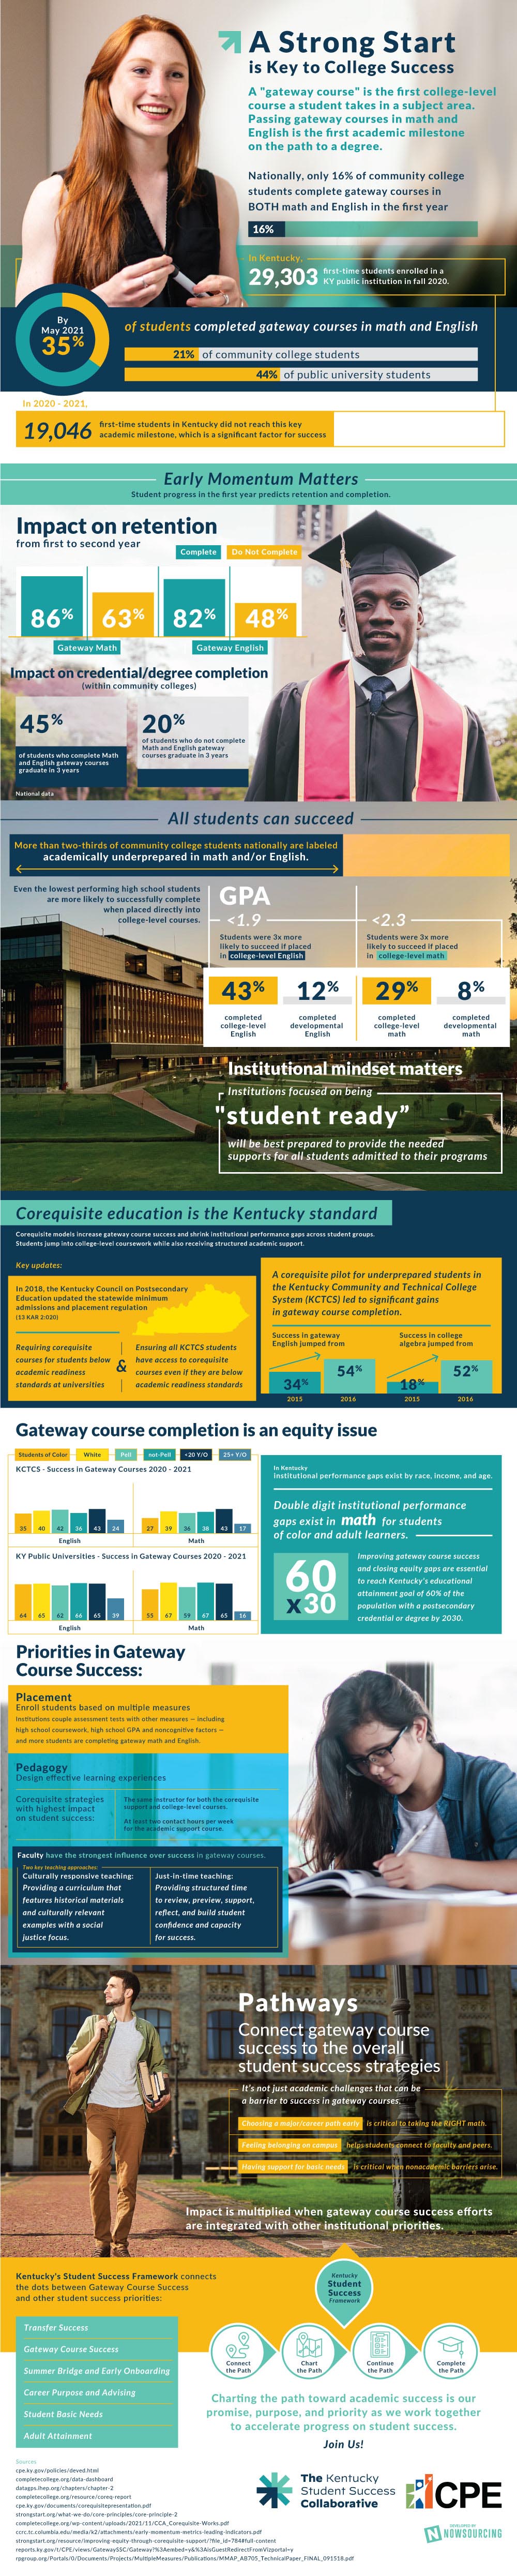 Gateway Courses are a Launchpad of Success